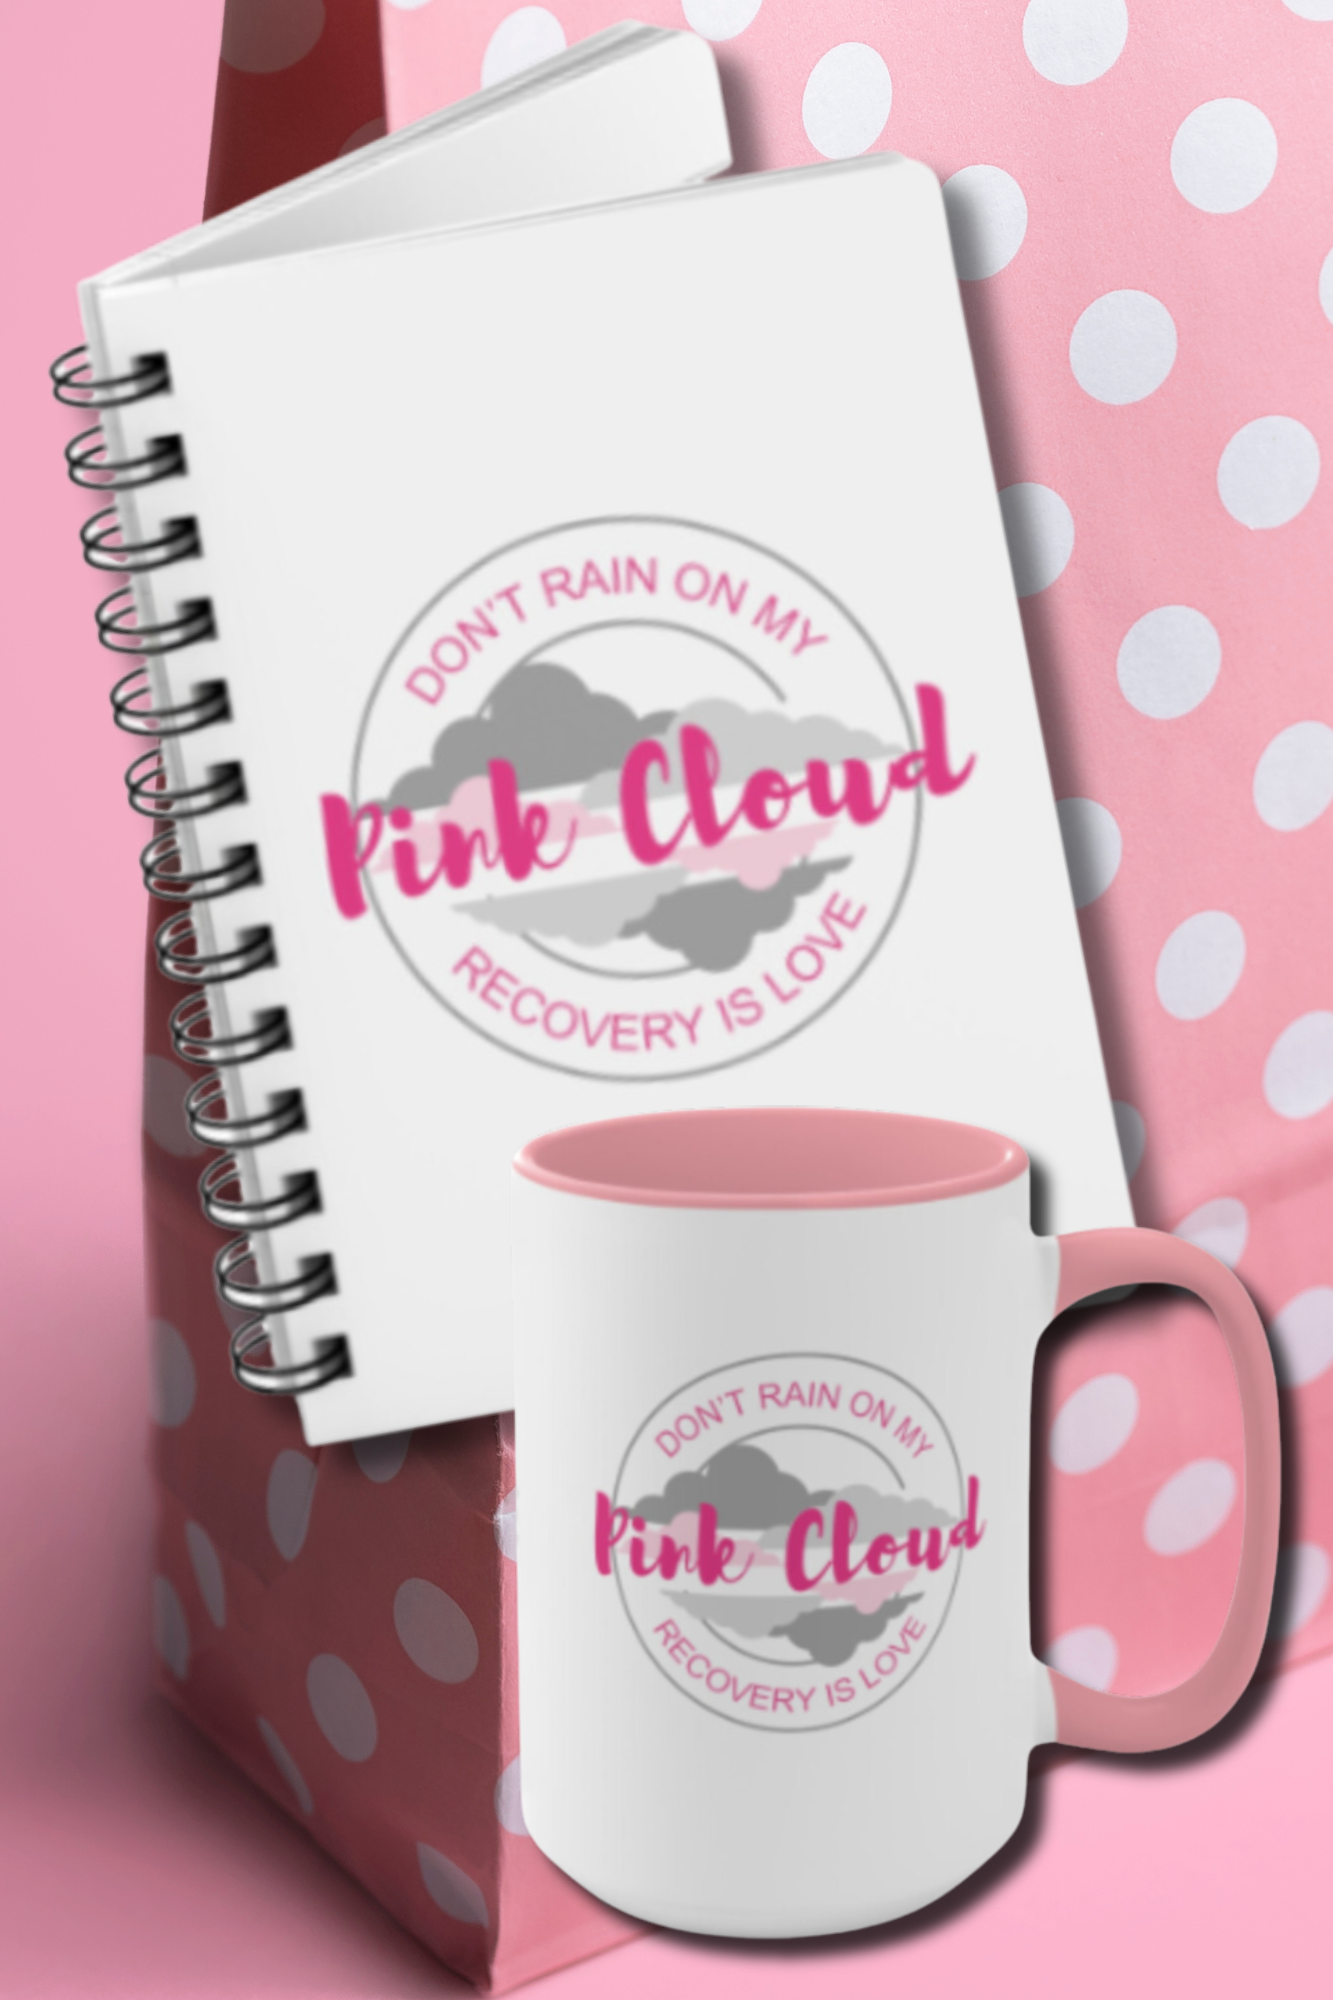 RECOVERY TOOLKIT "Don't Rain on My Pink Cloud" 15 oz. Mug w/ Recovery Journal (2 gifts in 1) FREE SHIPPING